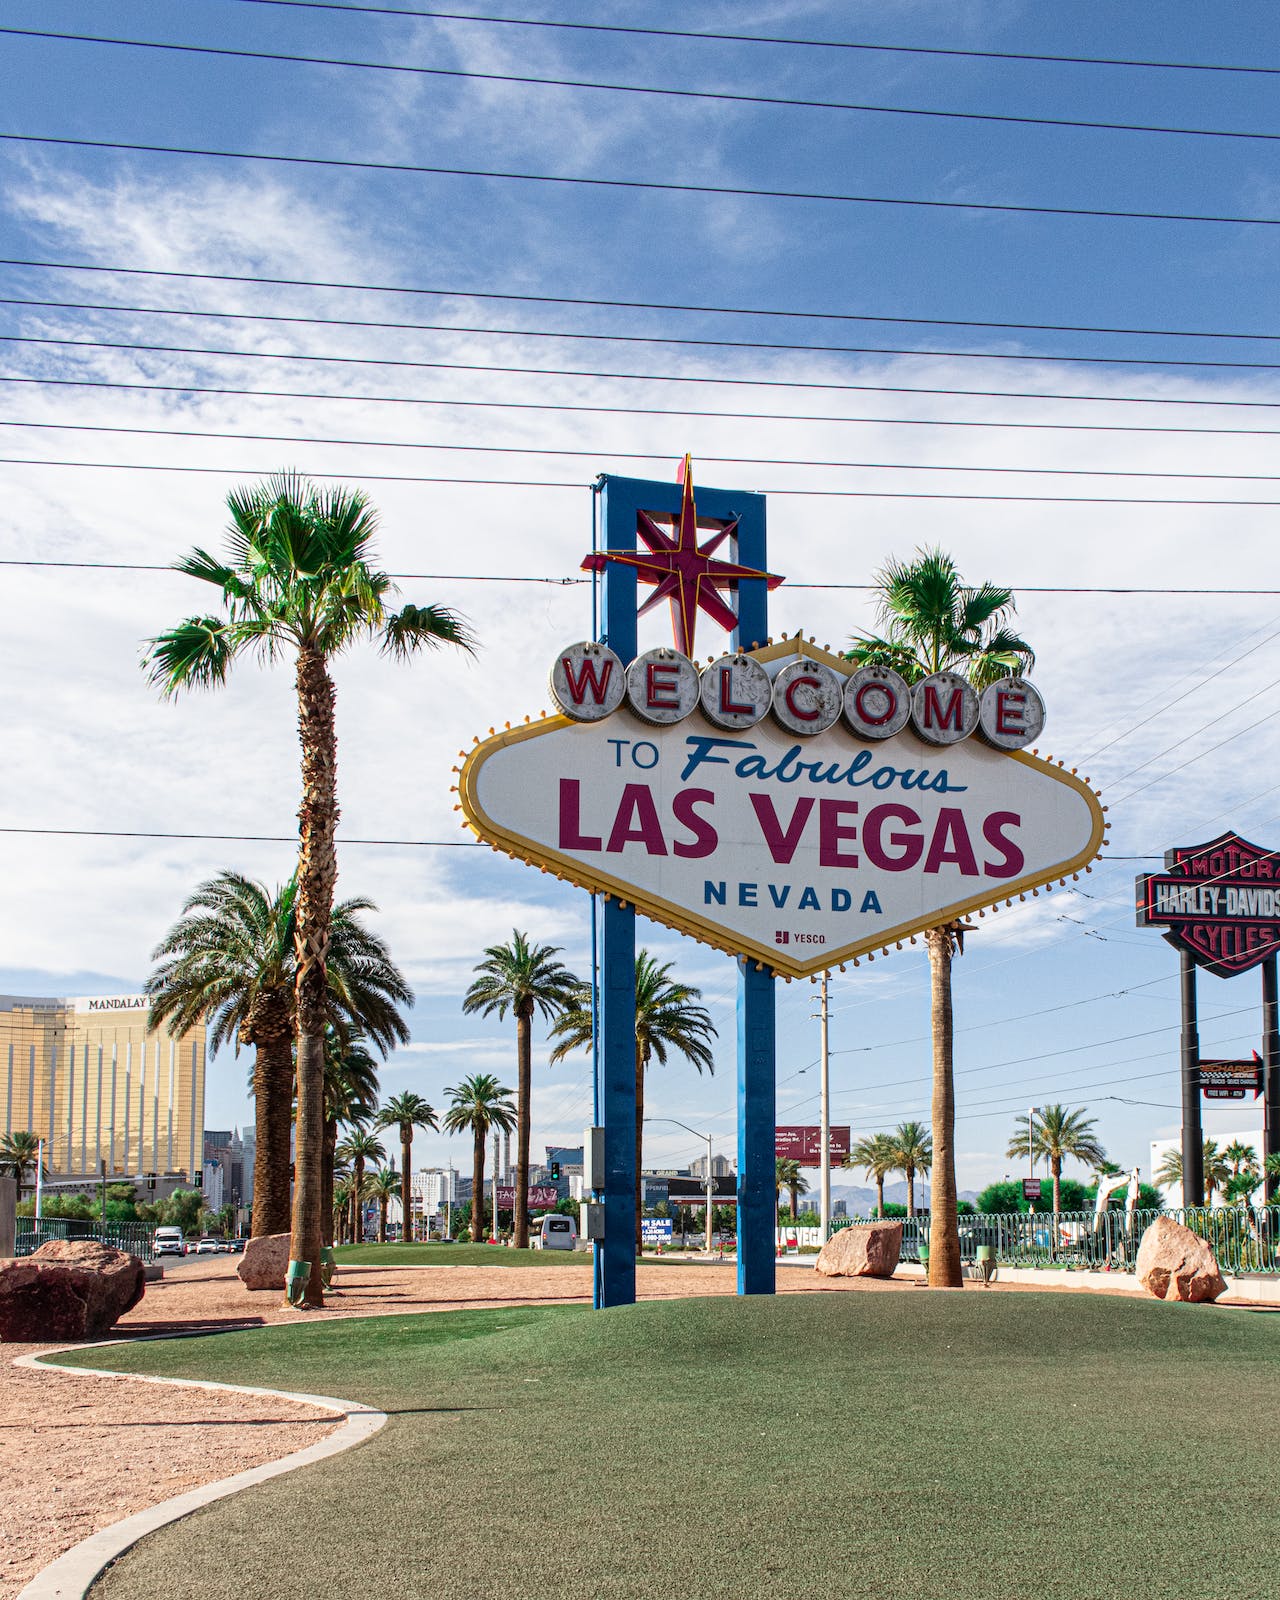 5 Tips To Make The Most Out Of Your Trip To Las Vegas